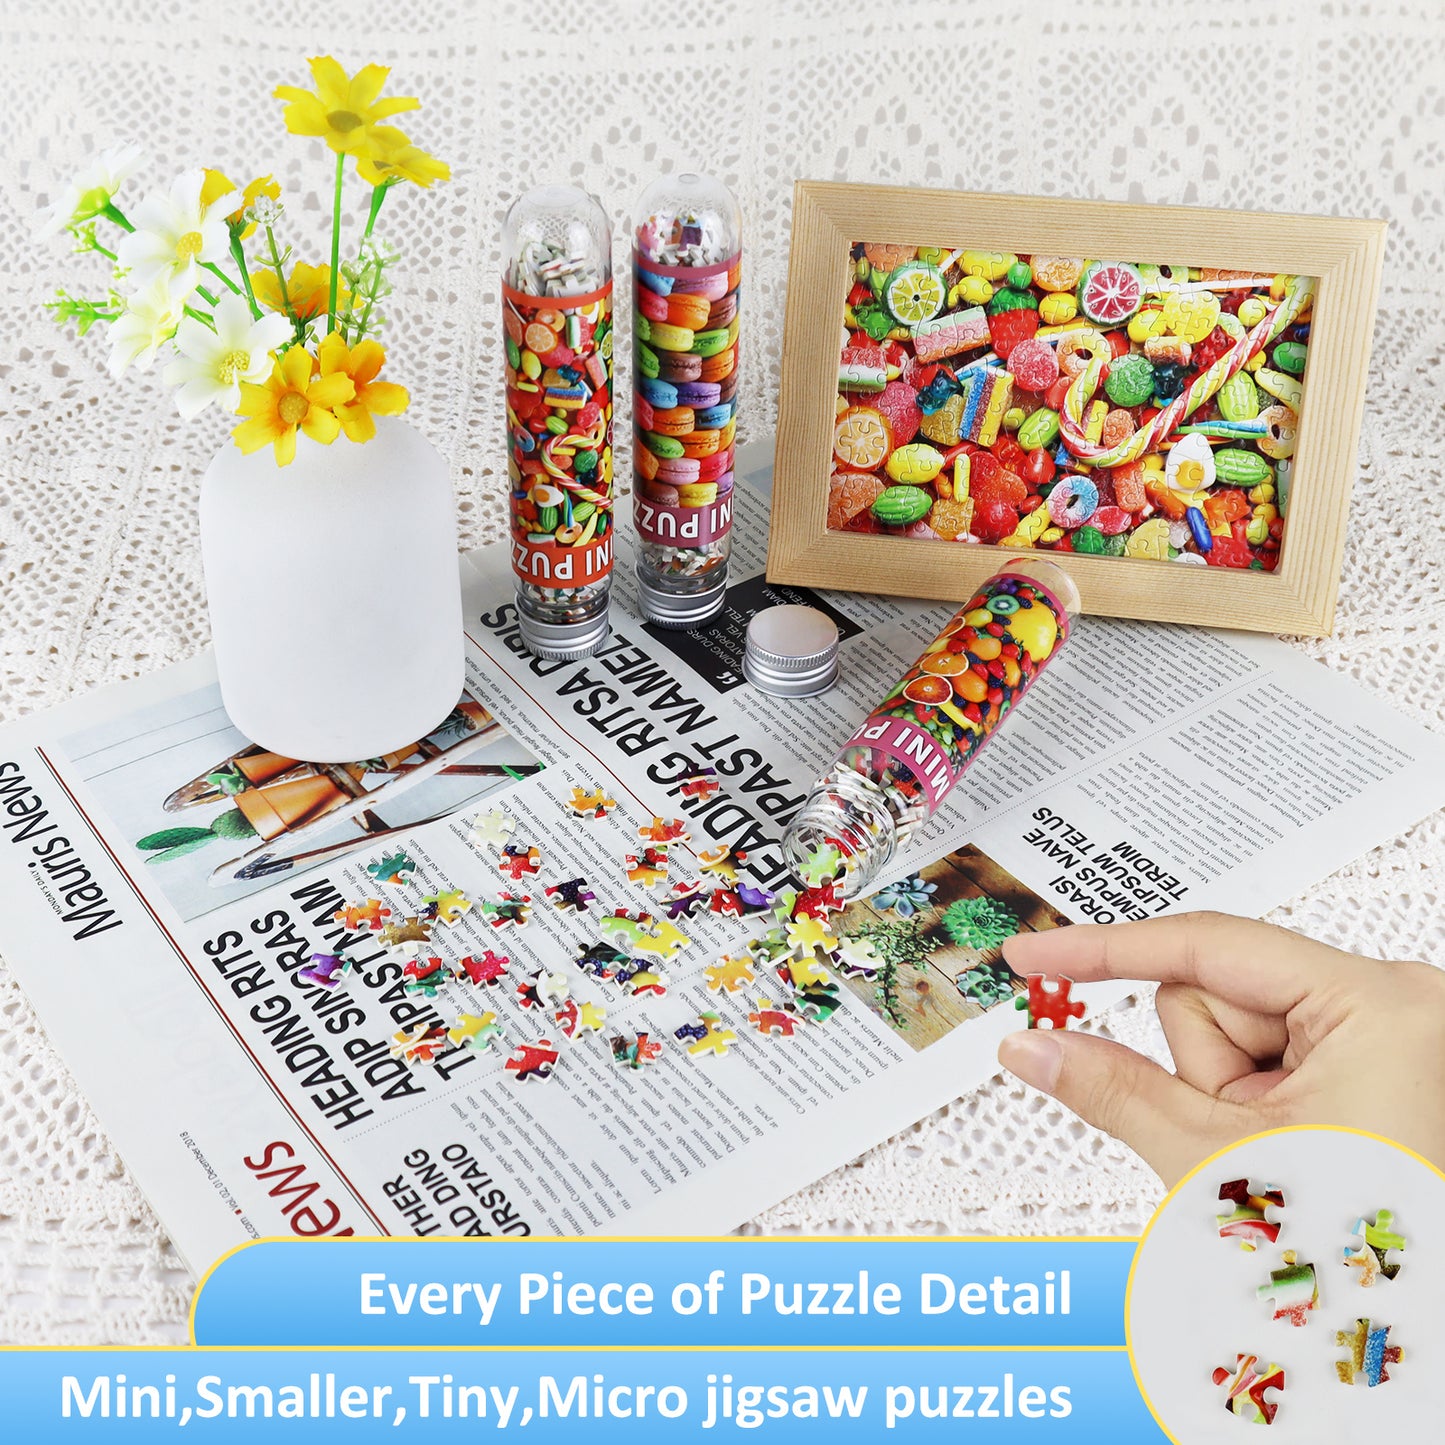 Small Jigsaw Puzzles Mini Size Colorful Candy Fruits Macaron 150 Pieces Puzzles for Adult(Pack of 3)